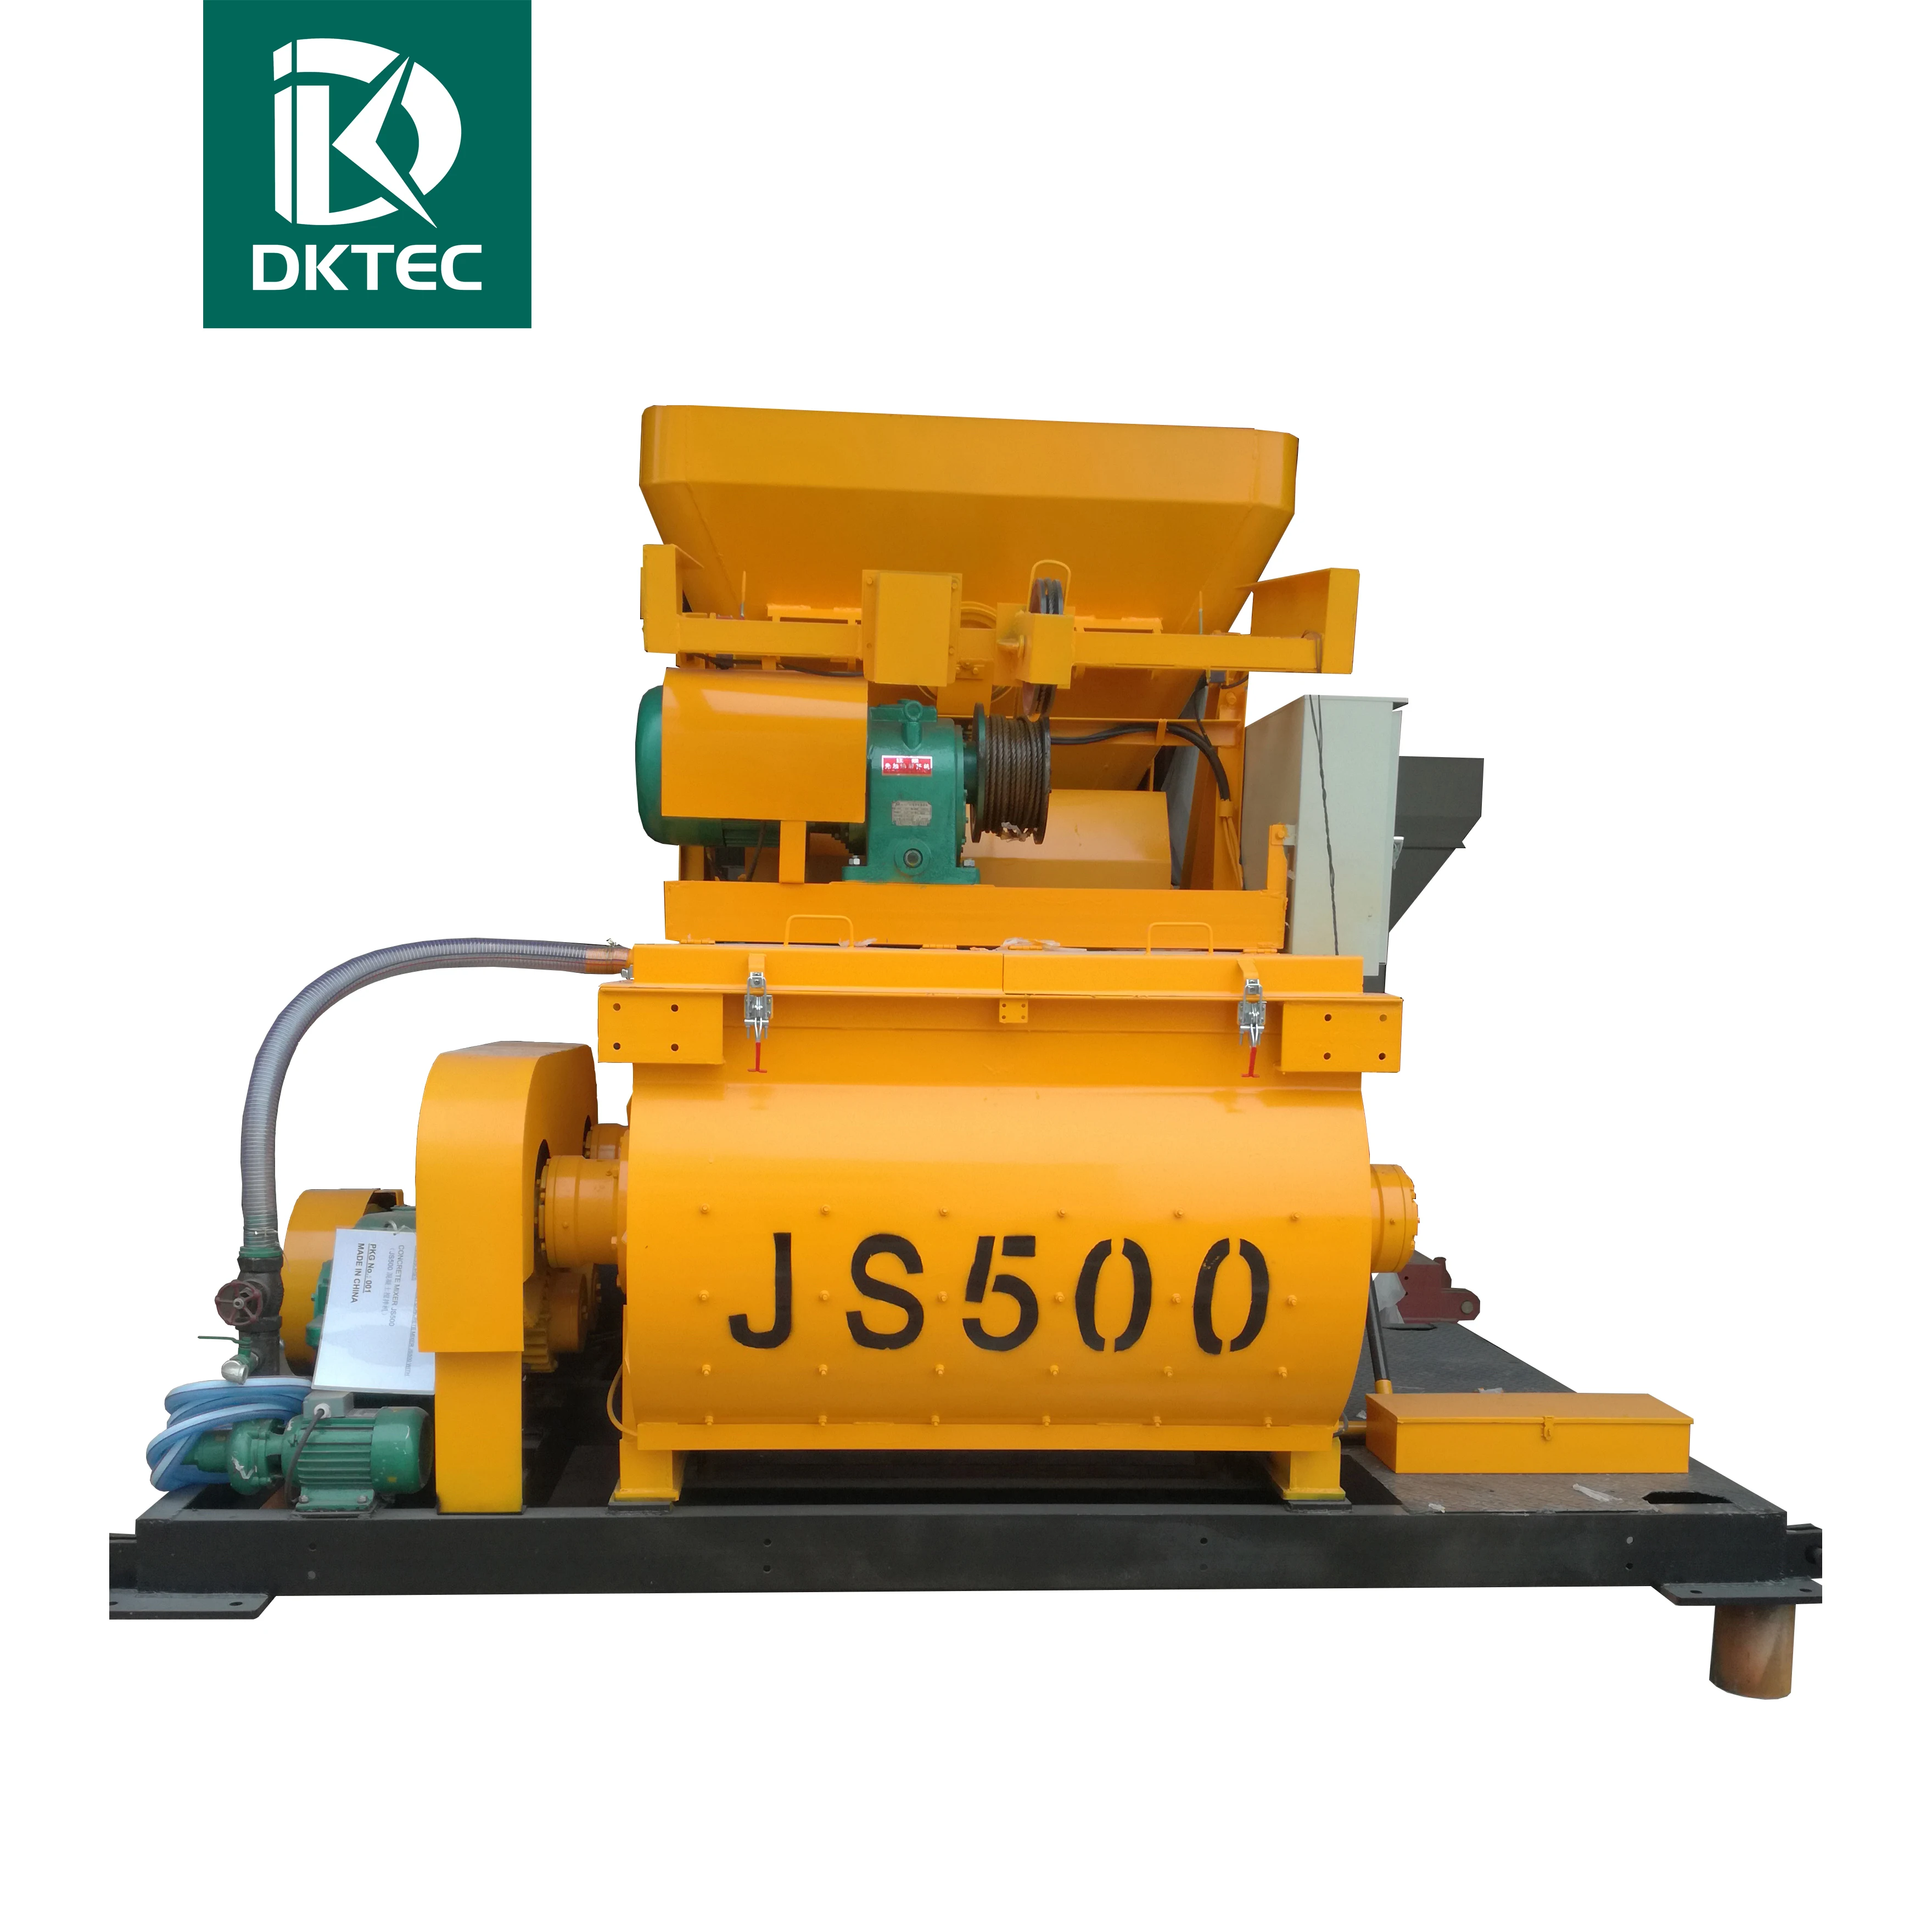 Js500 Concrete Mixer Machine With Lift Buy Concrete Mixer Js500 Concrete Mixer Machine With Lift Product On Alibaba Com